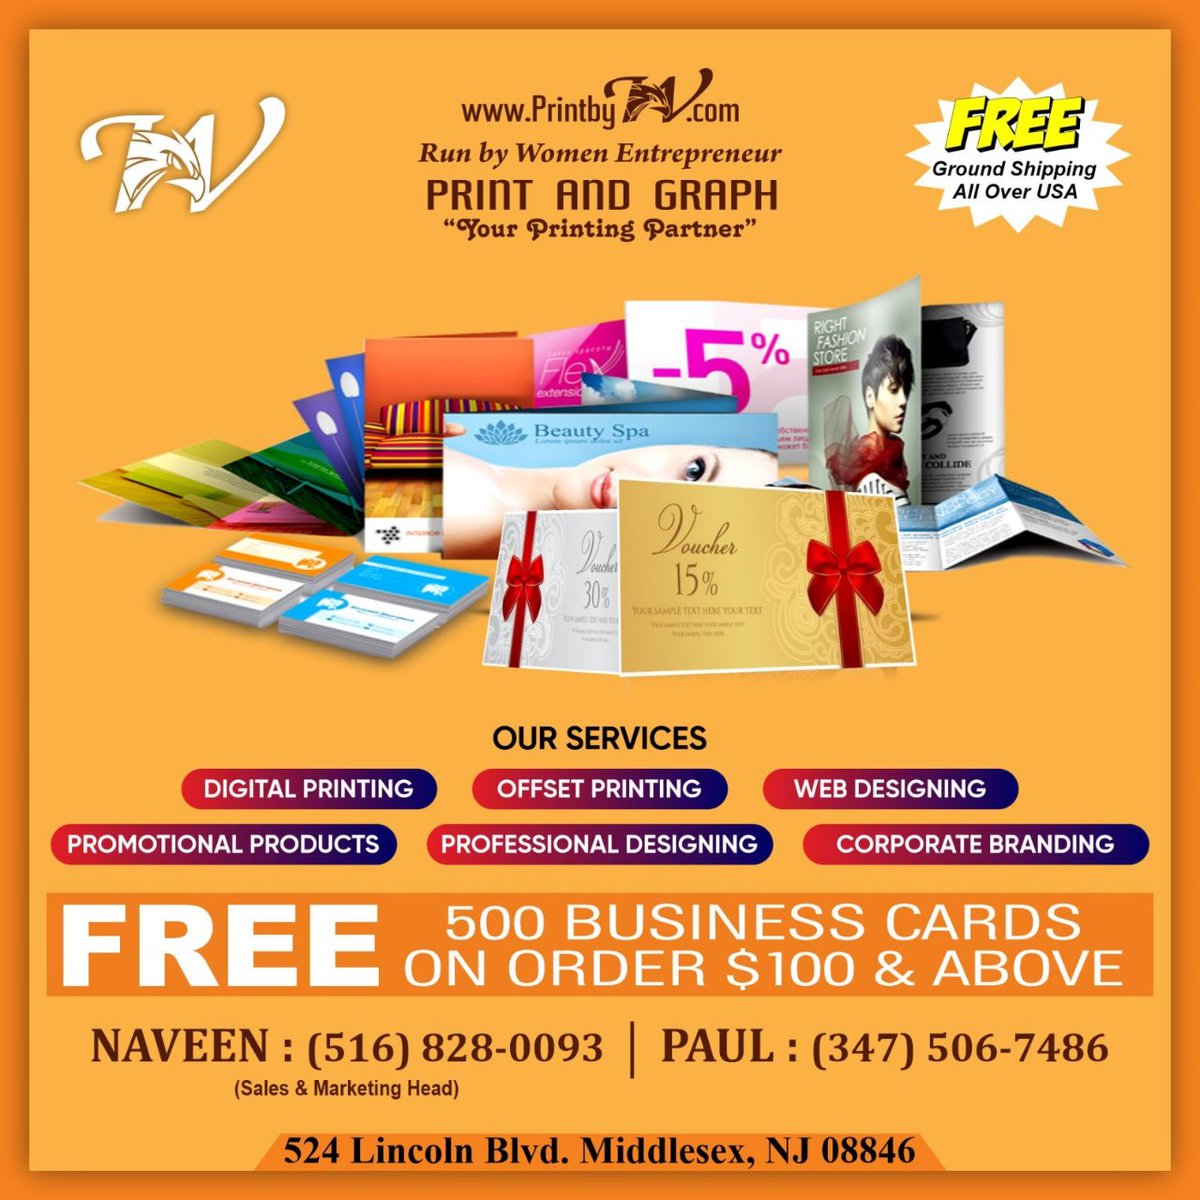 Boost your business with PrintbyW 🚀 Top-notch printing & digital marketing. Contact us now! . printbyw.com . . Tags #printing #digitalmarketing #PrintbyWQuality #TrustedPrintingPartner #BusinessCards #Flyers #essentials #printbyw #printandgraph #newyork #us